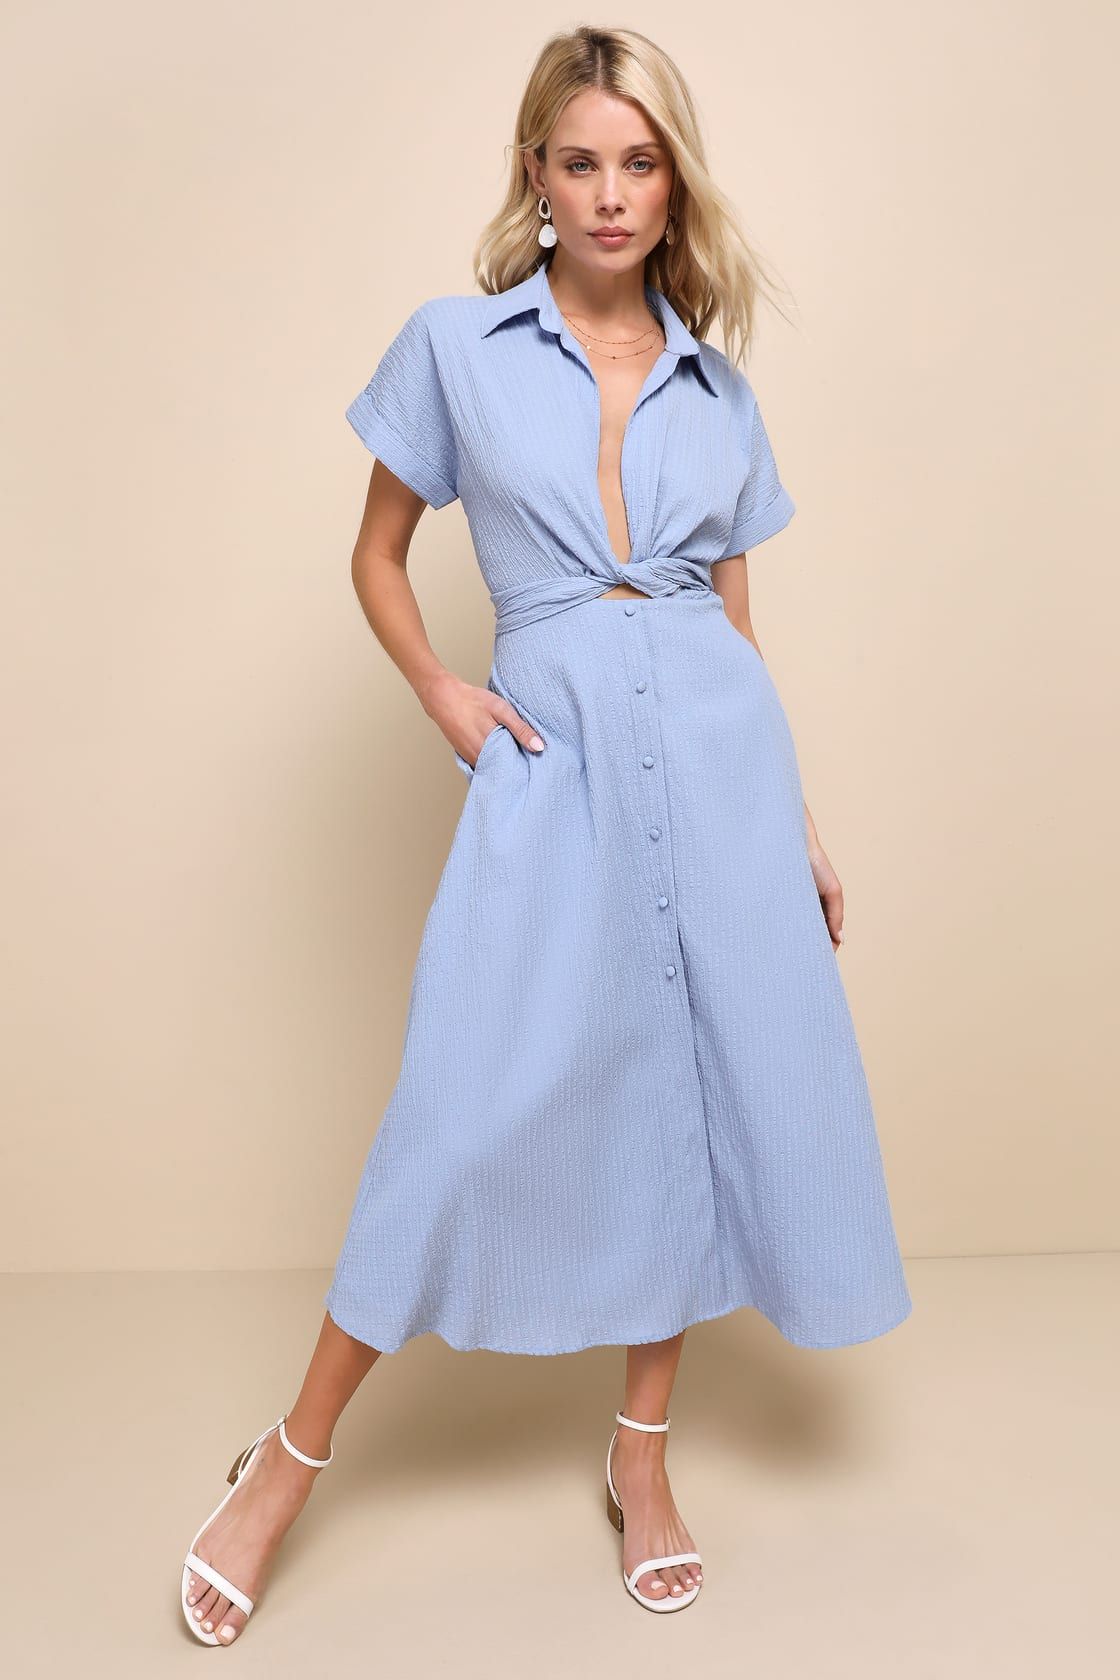 Palermo Perfection Light Blue Collared Midi Dress with Pockets | Lulus